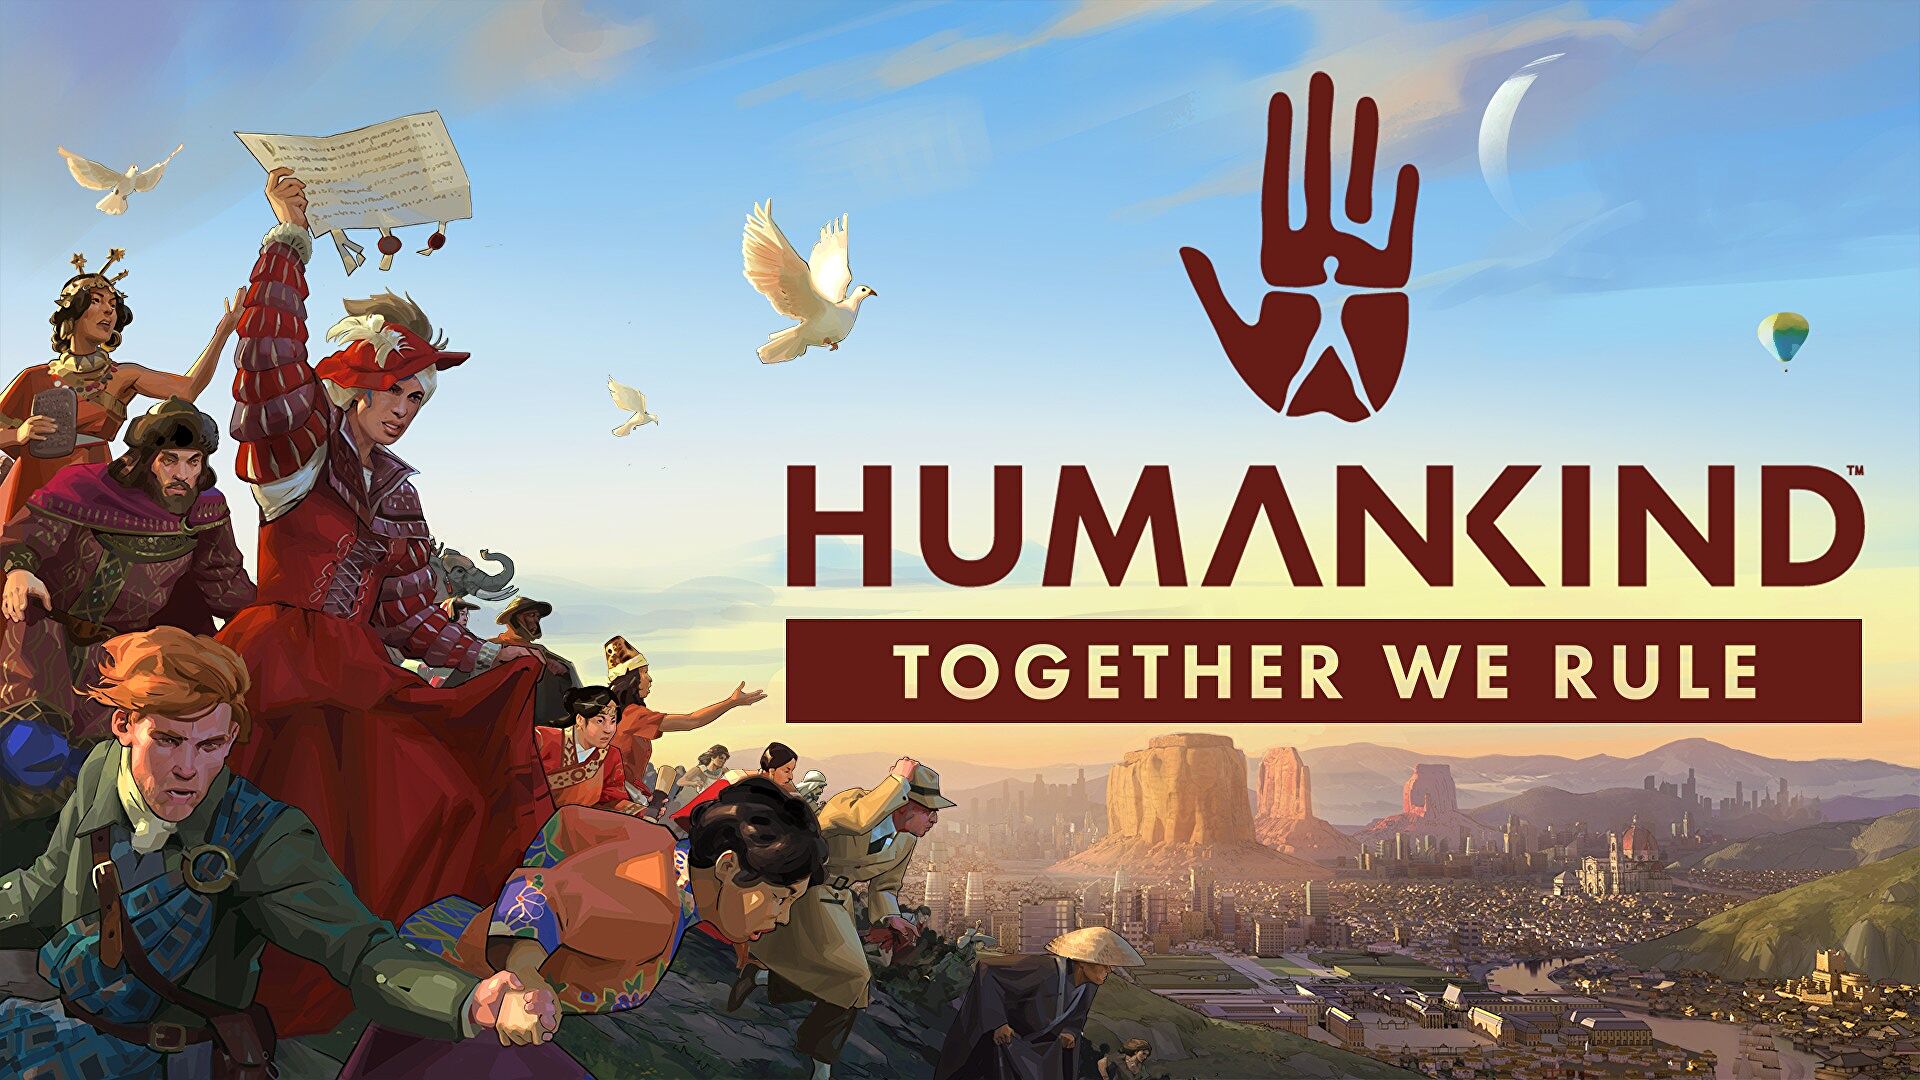 Humankind’s first major expansion resorts to diplomacy in autumn